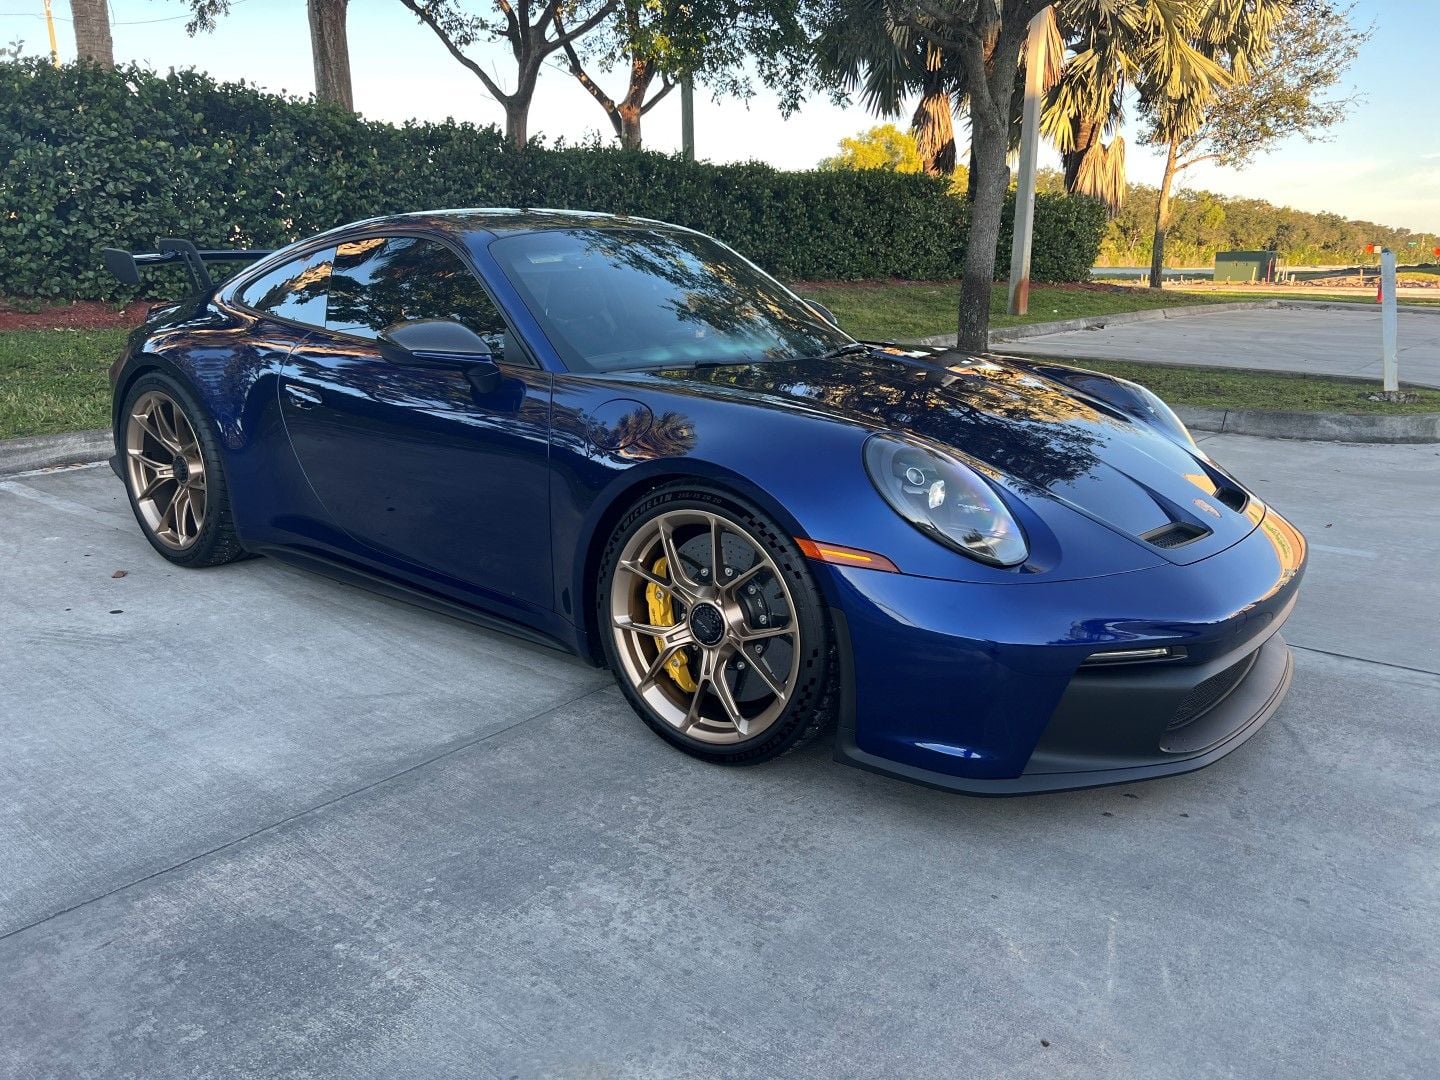 2021 Porsche 911 - 2022 Porsche 911 GT3 Gentian Blue full PPF - Used - VIN WP0AC2A95NS268557 - 715 Miles - 6 cyl - 2WD - Manual - Coupe - Blue - Twinsburg, OH 44087, United States